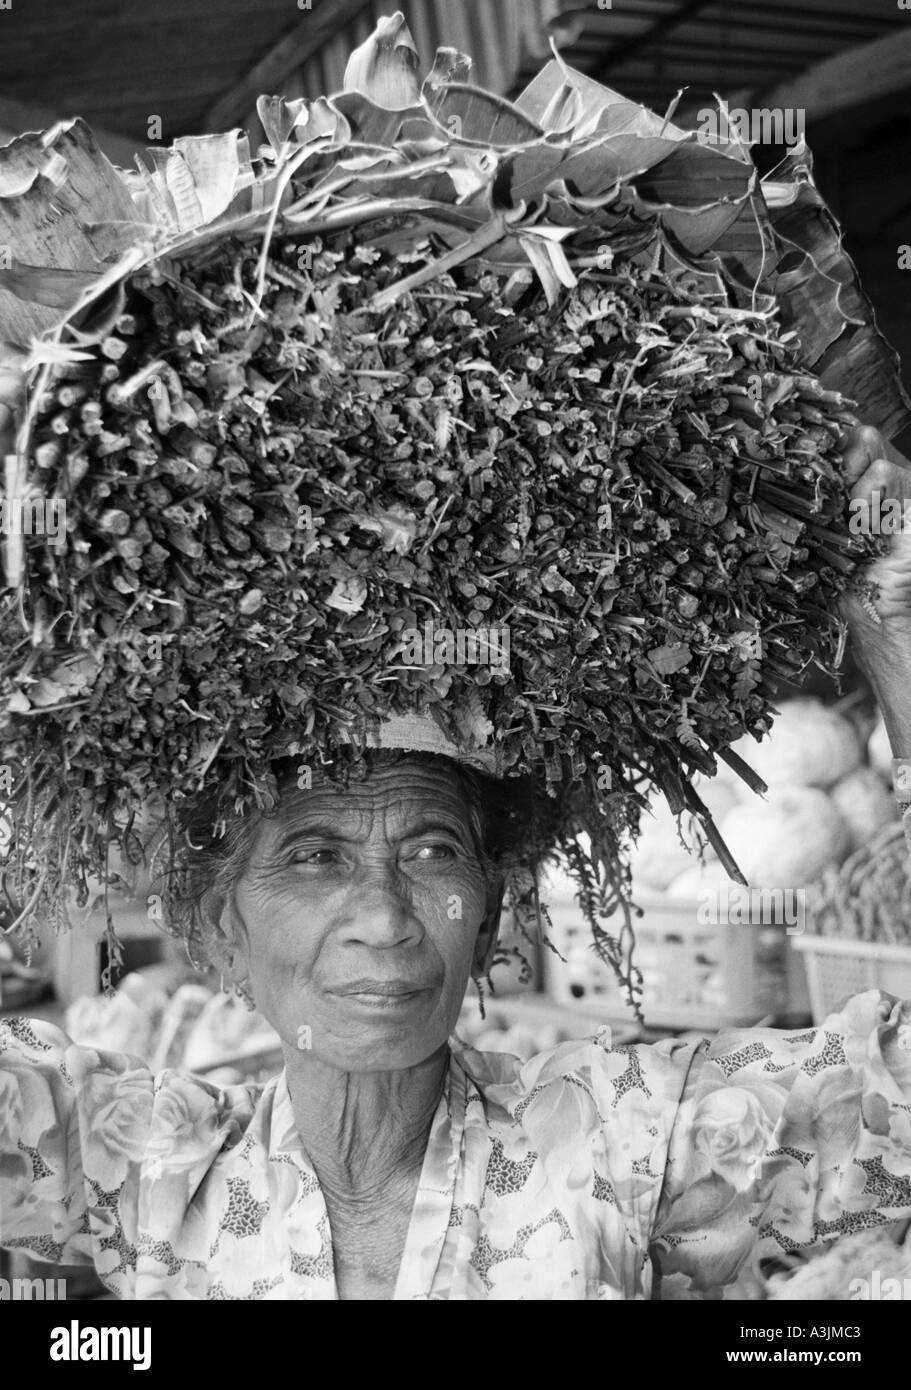 elderly local woman with bundle of leaves and sticks on her head at kandikuning market bali indonesia Stock Photo